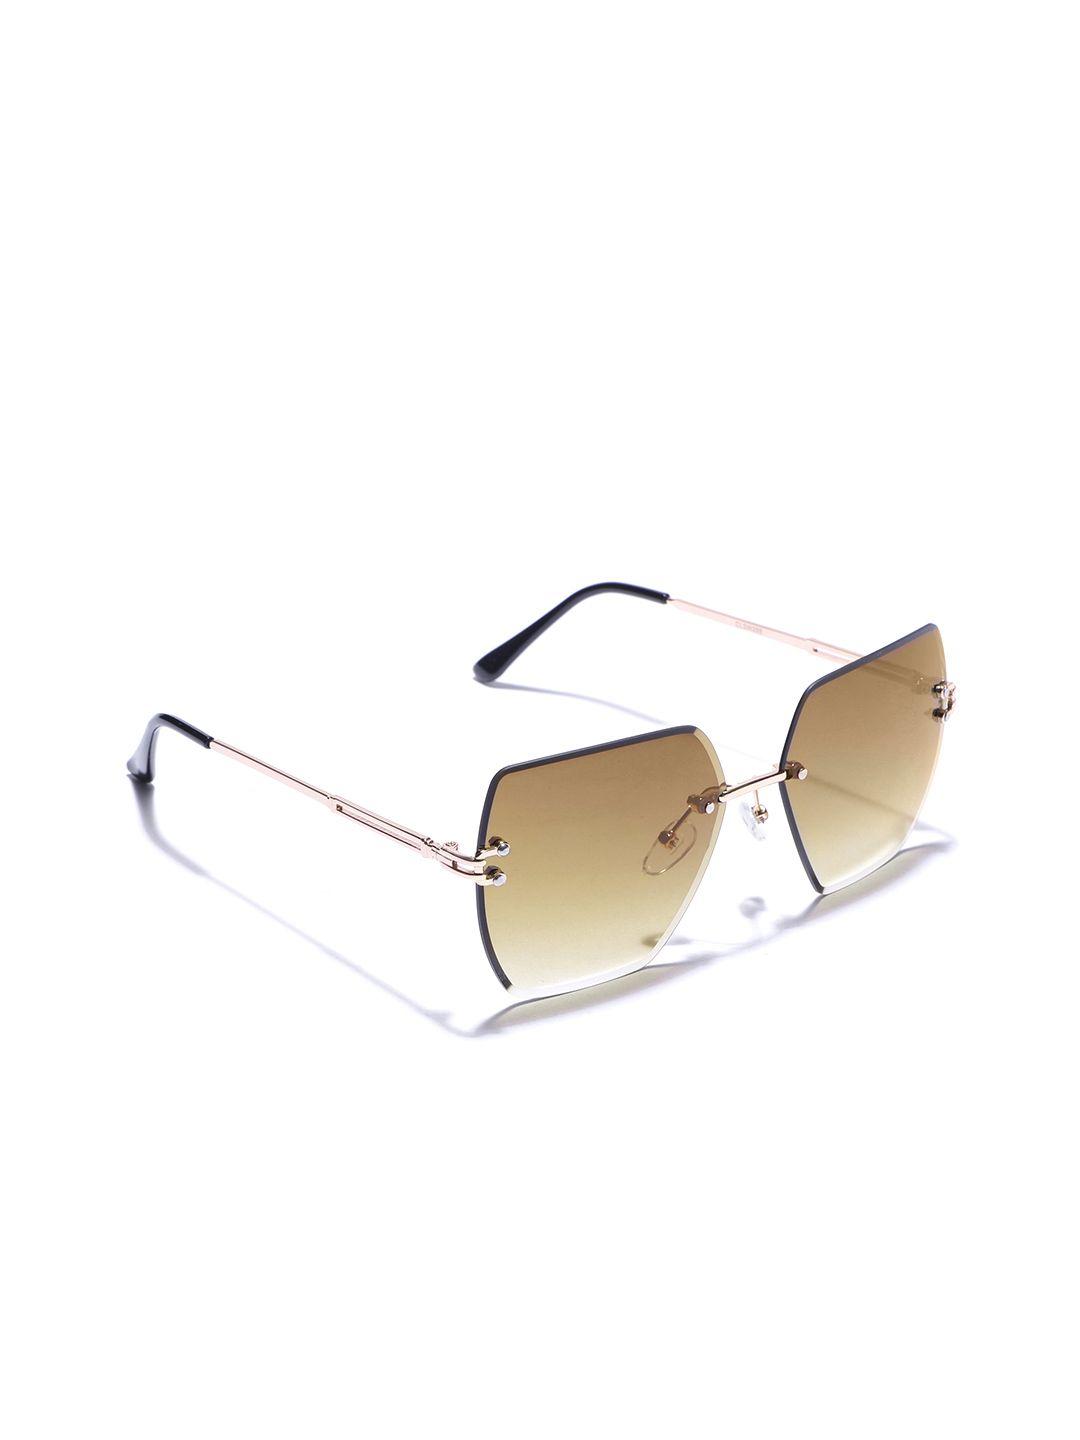 carlton-london-women-oversized-sunglasses-with-uv-protected-lens-clsw288